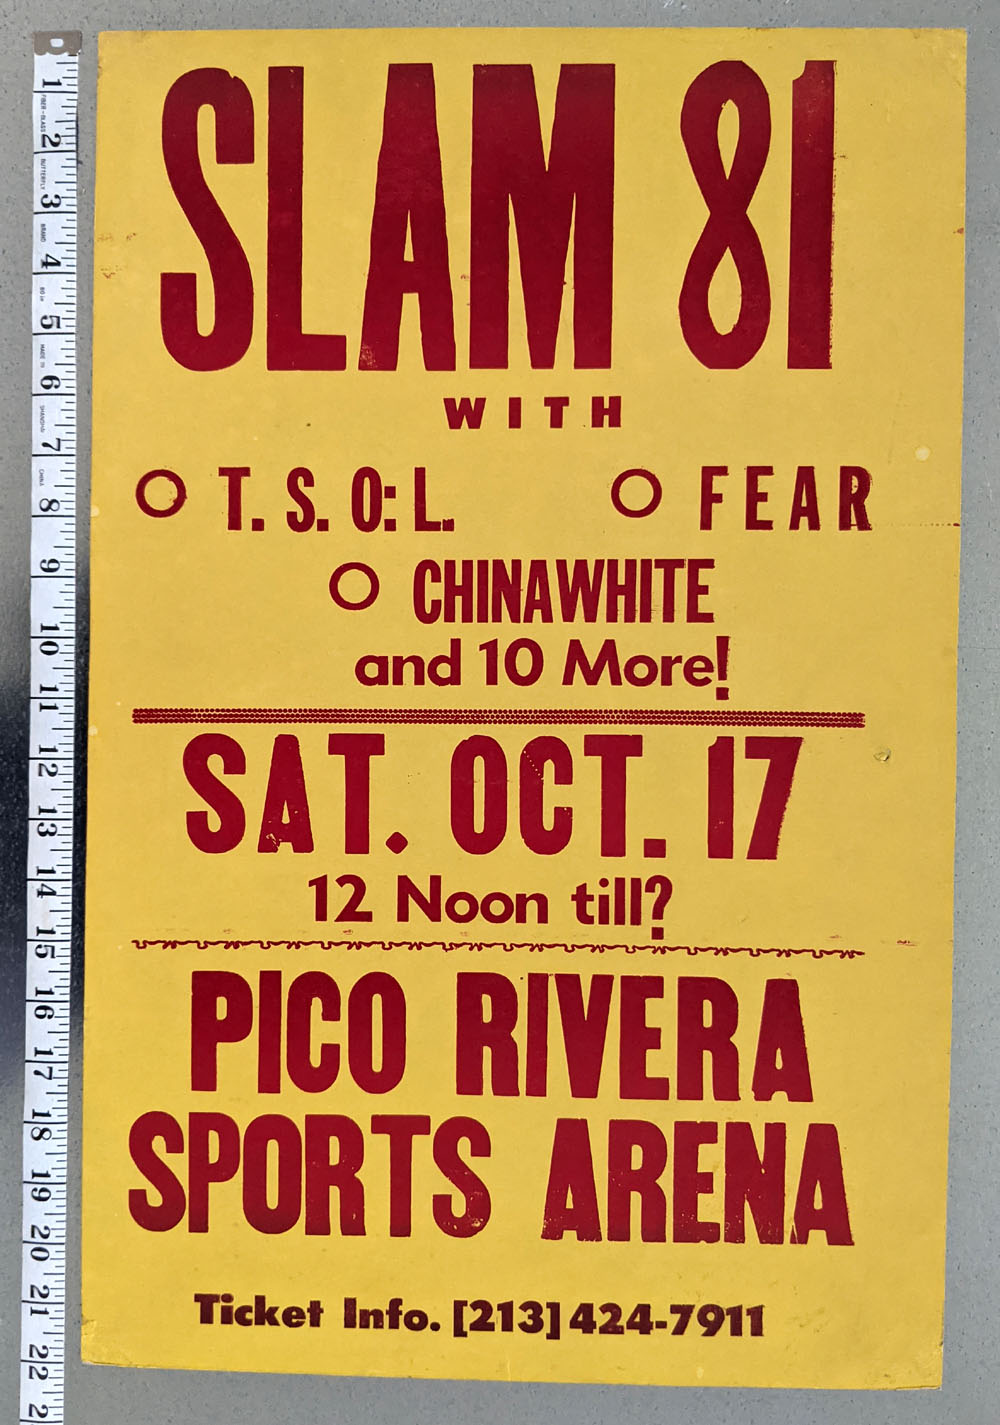 SLAM 81 boxing style POSTER